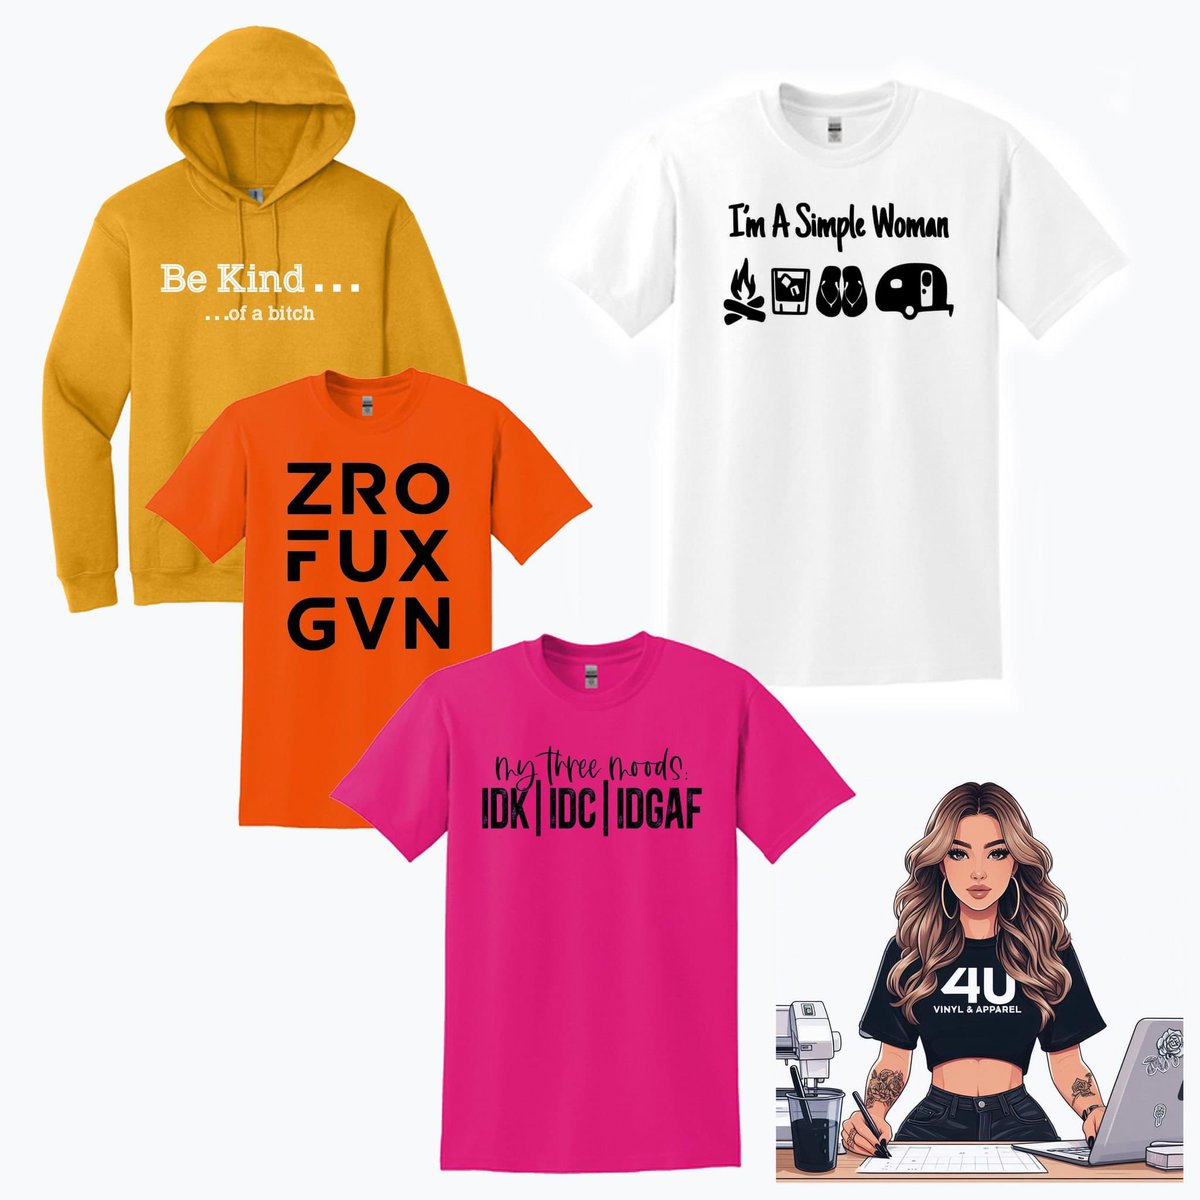 Want to make a statement? We've got you covered!

Send us a message and we can get your apparel started 4U!

#4uvinylandapparel #AdrianMI #customized #LenaweeCountyMI #ToledoOH #LucasCountyOH #4u #shirts #apparel #stickers #decals